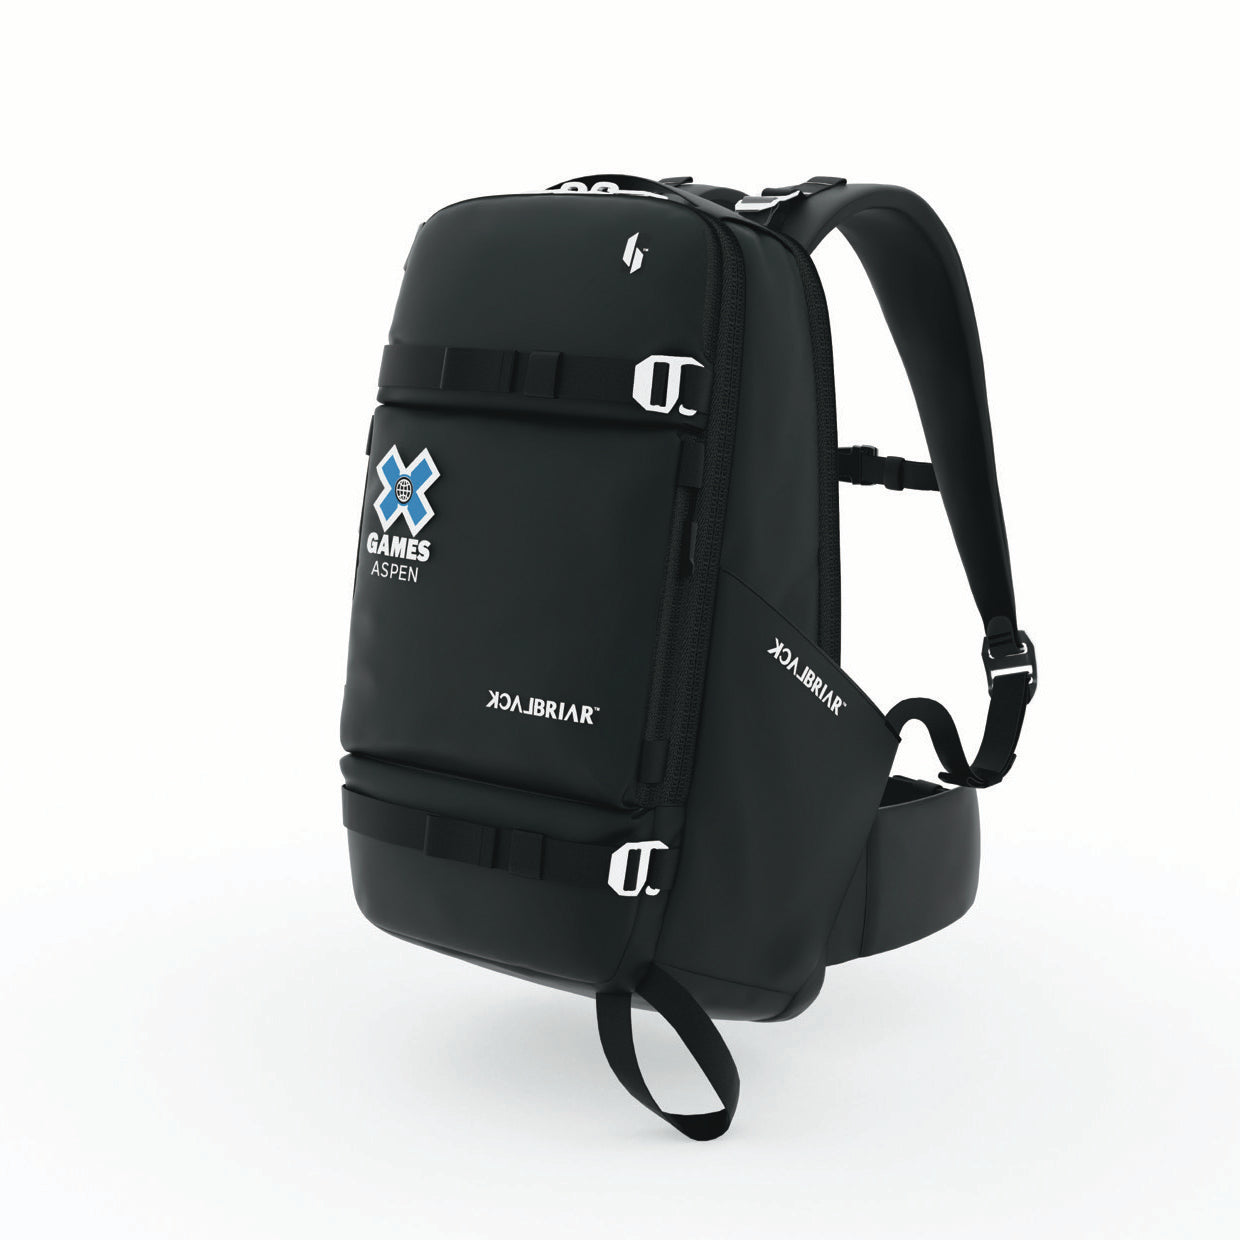 X GAMES BLACKBRIAR ATHLETE BACKPACK - LIMITED EDITION